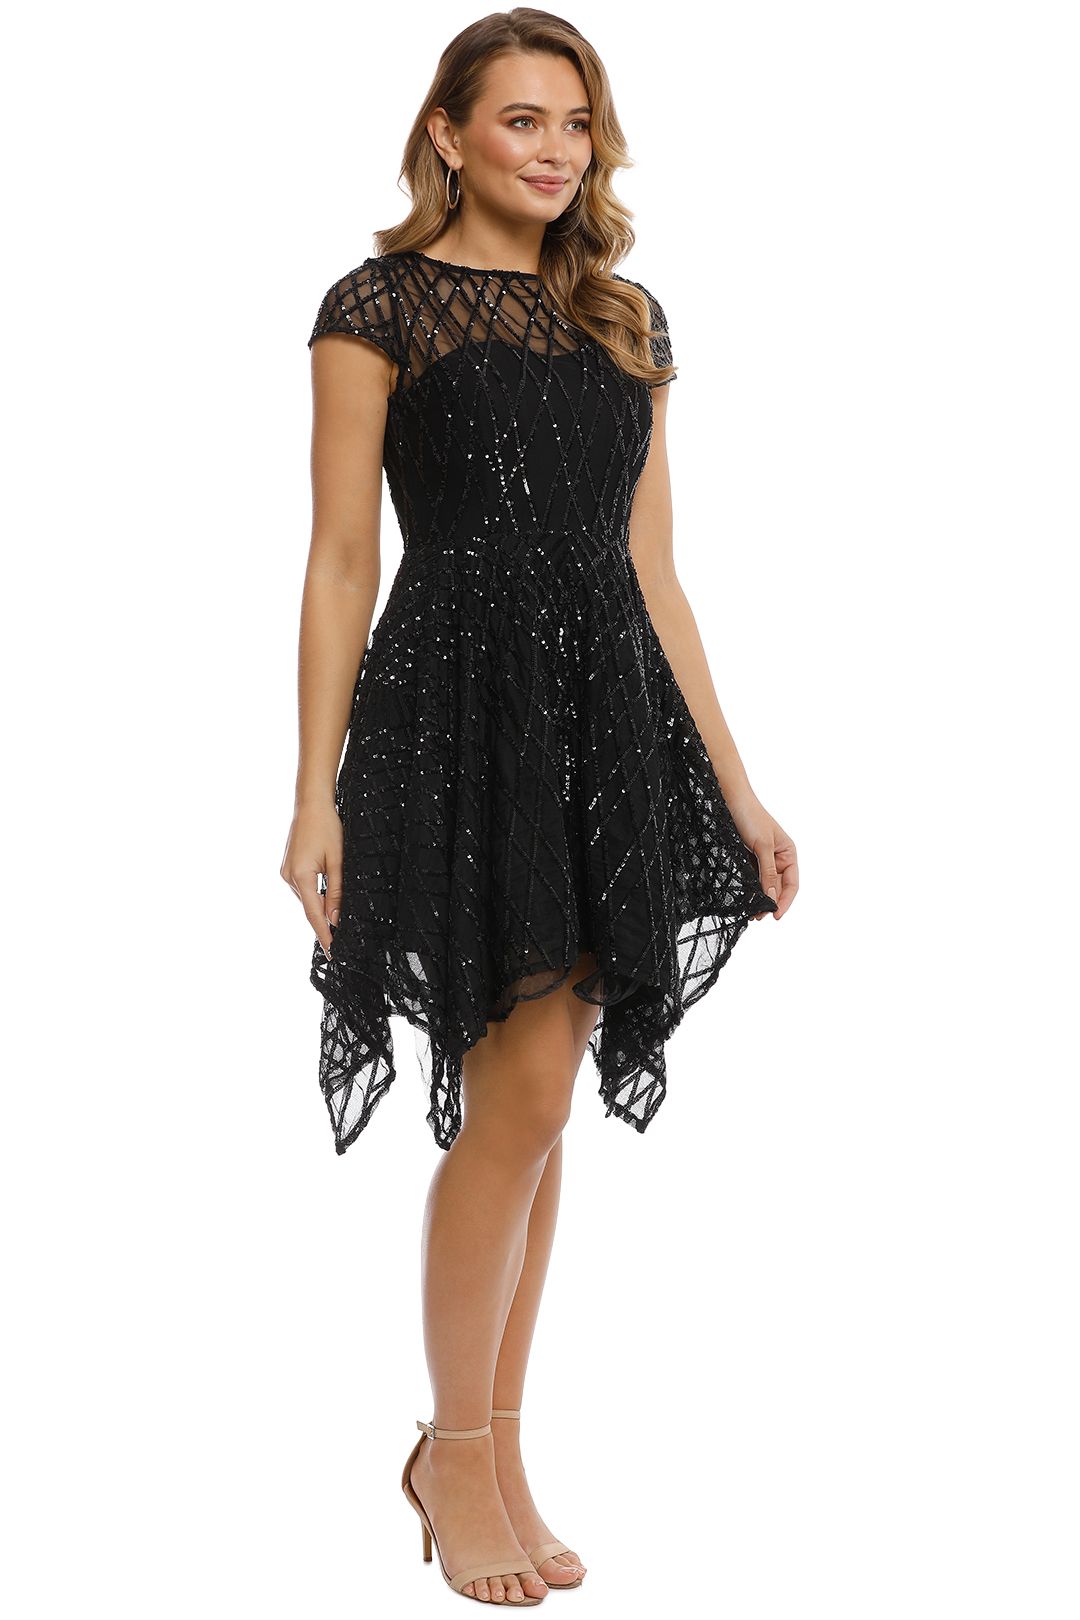 Grace and Hart - Shooting Stars Fit n Flare - Black - Side